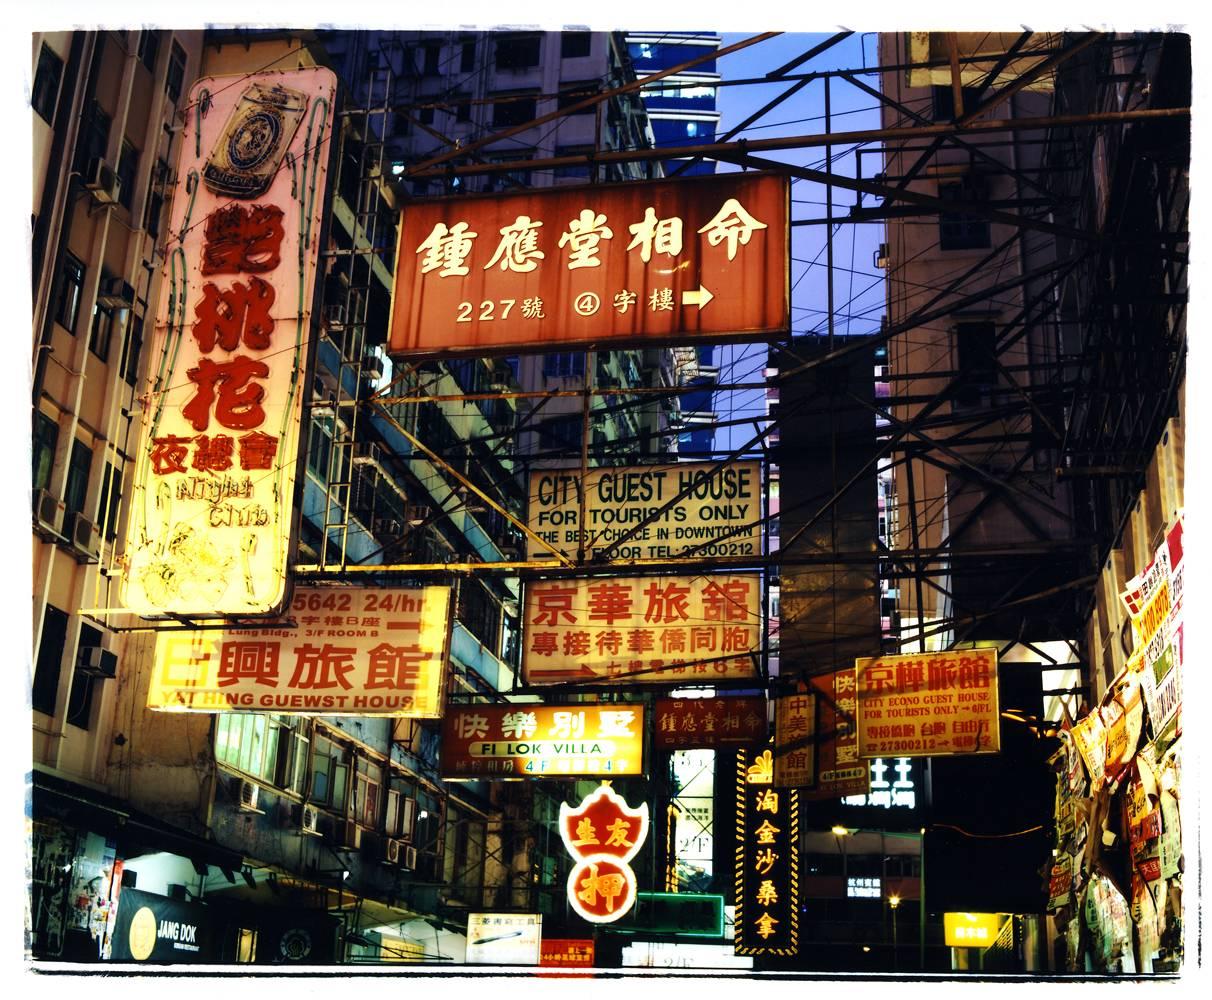 Richard Heeps Color Photograph - Best Choice in Downtown, Kowloon, Hong Kong - Asian Architecture Photography